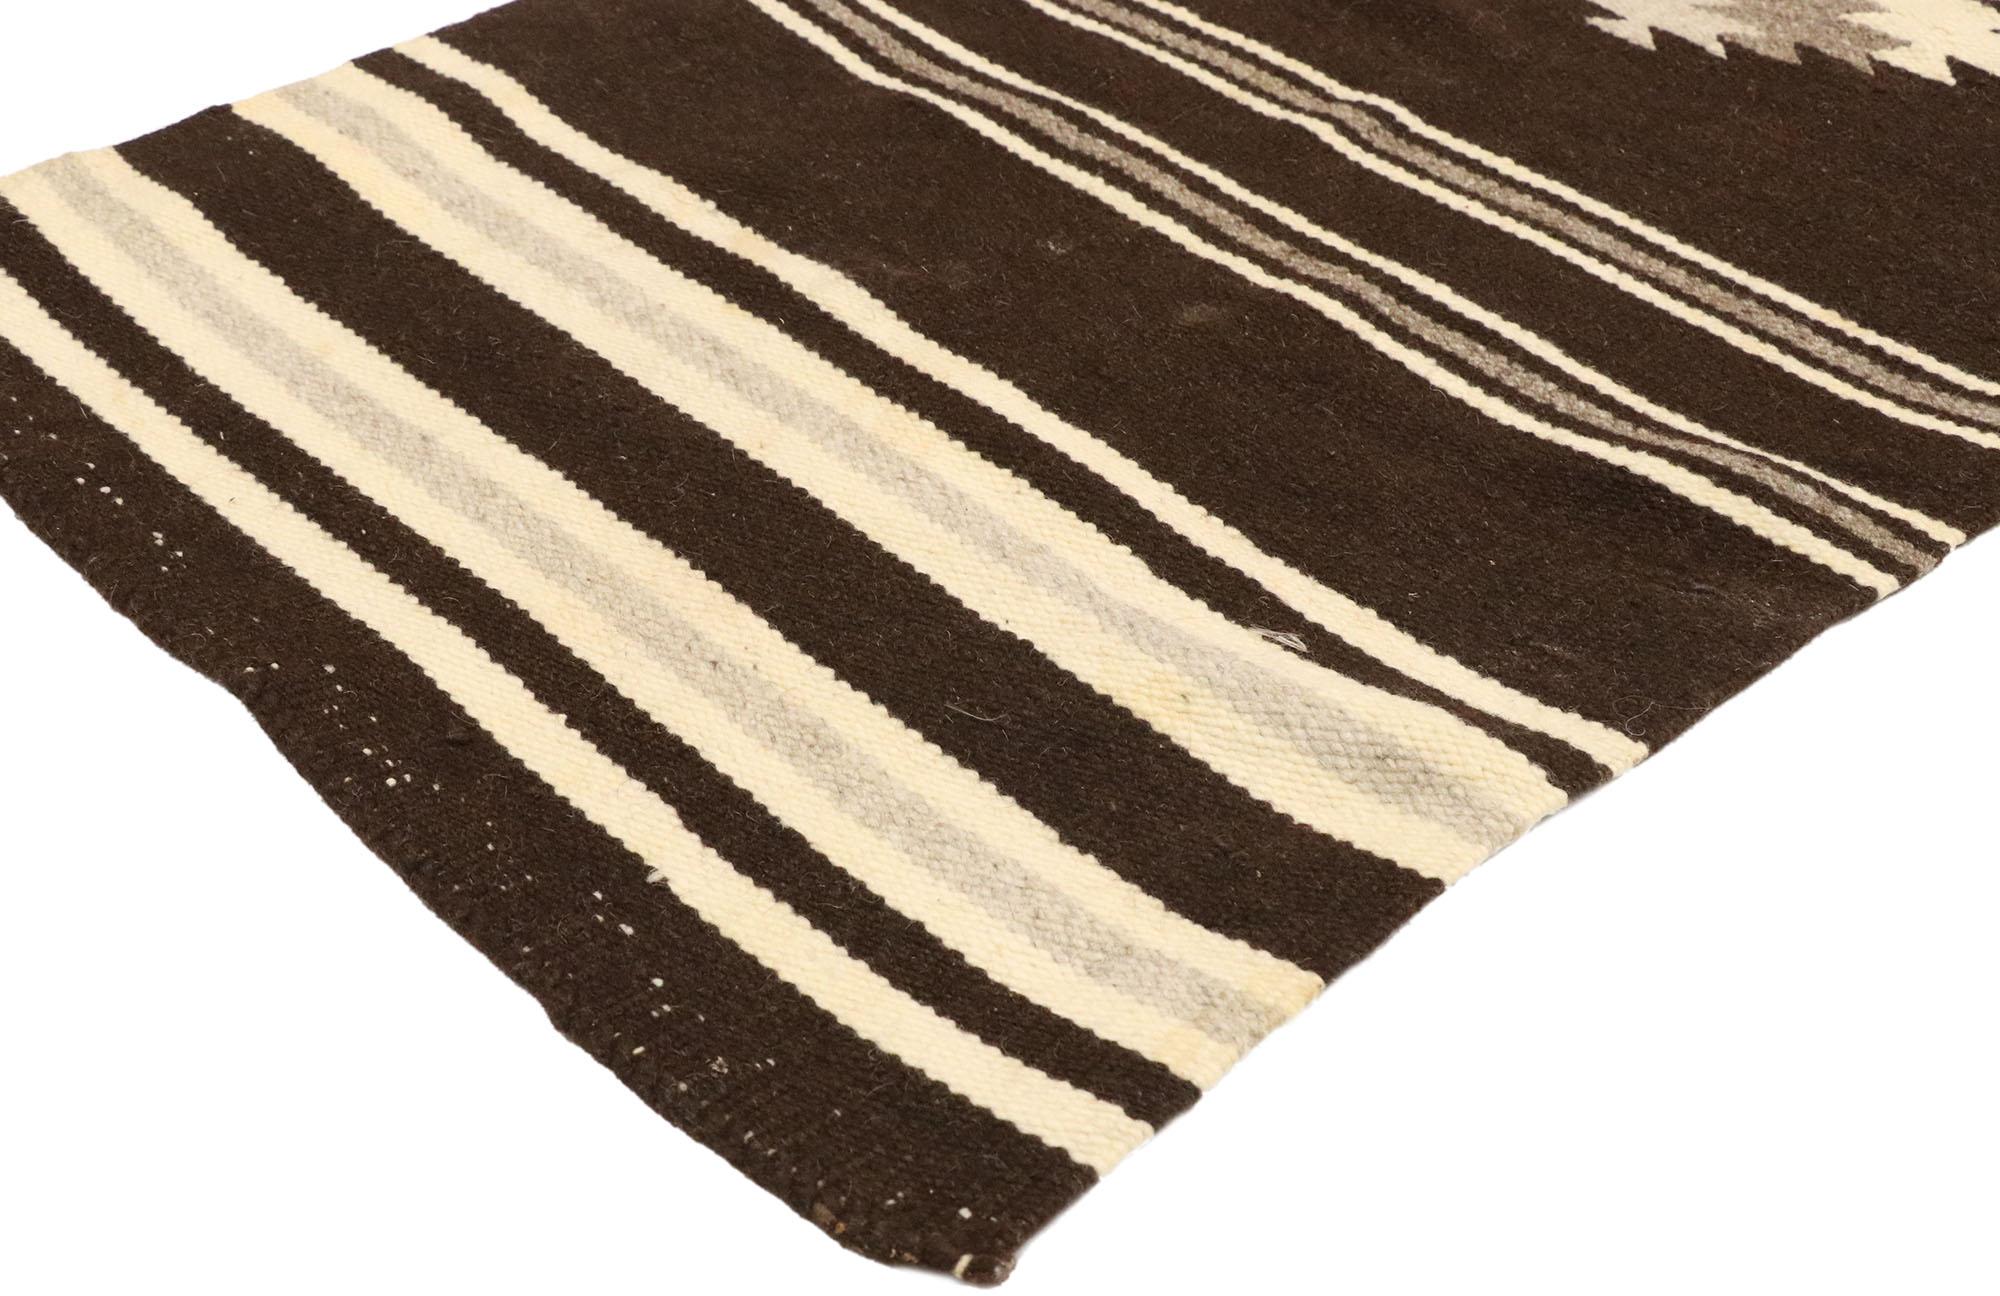 77484 vintage Navajo Kilim Rug with Native American style and two grey hills vibes. With its bold expressive design, incredible detail and texture, this handwoven wool vintage Navajo Kilim rug is a captivating vision of woven beauty highlighting